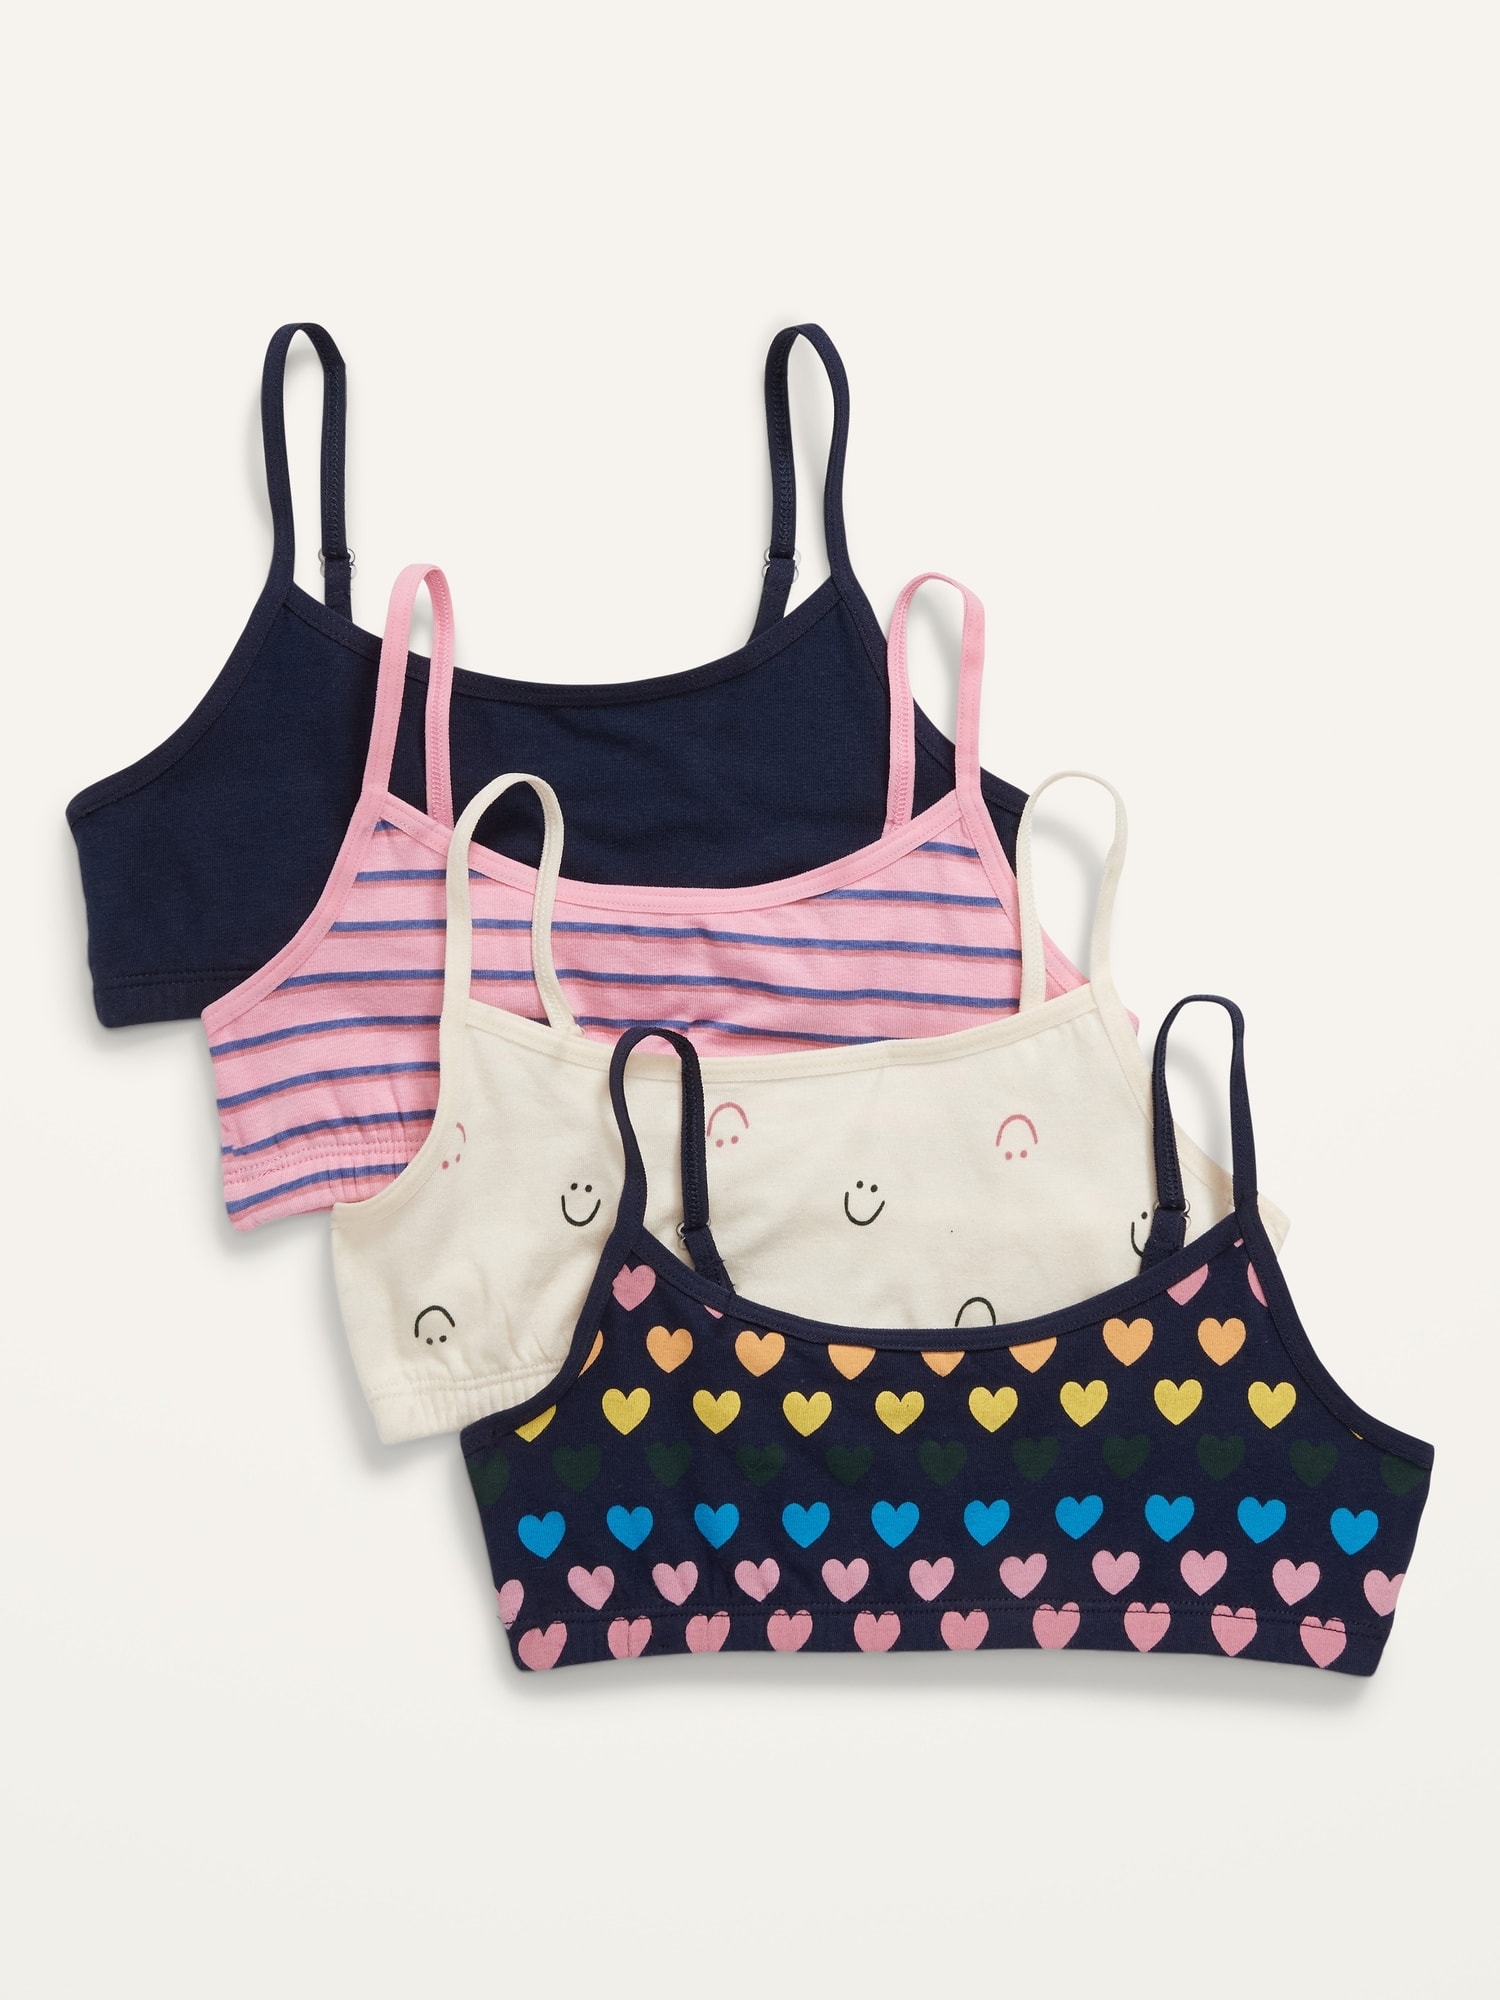 Breathable Training Bras For School Girls 12-15 Beginer's First